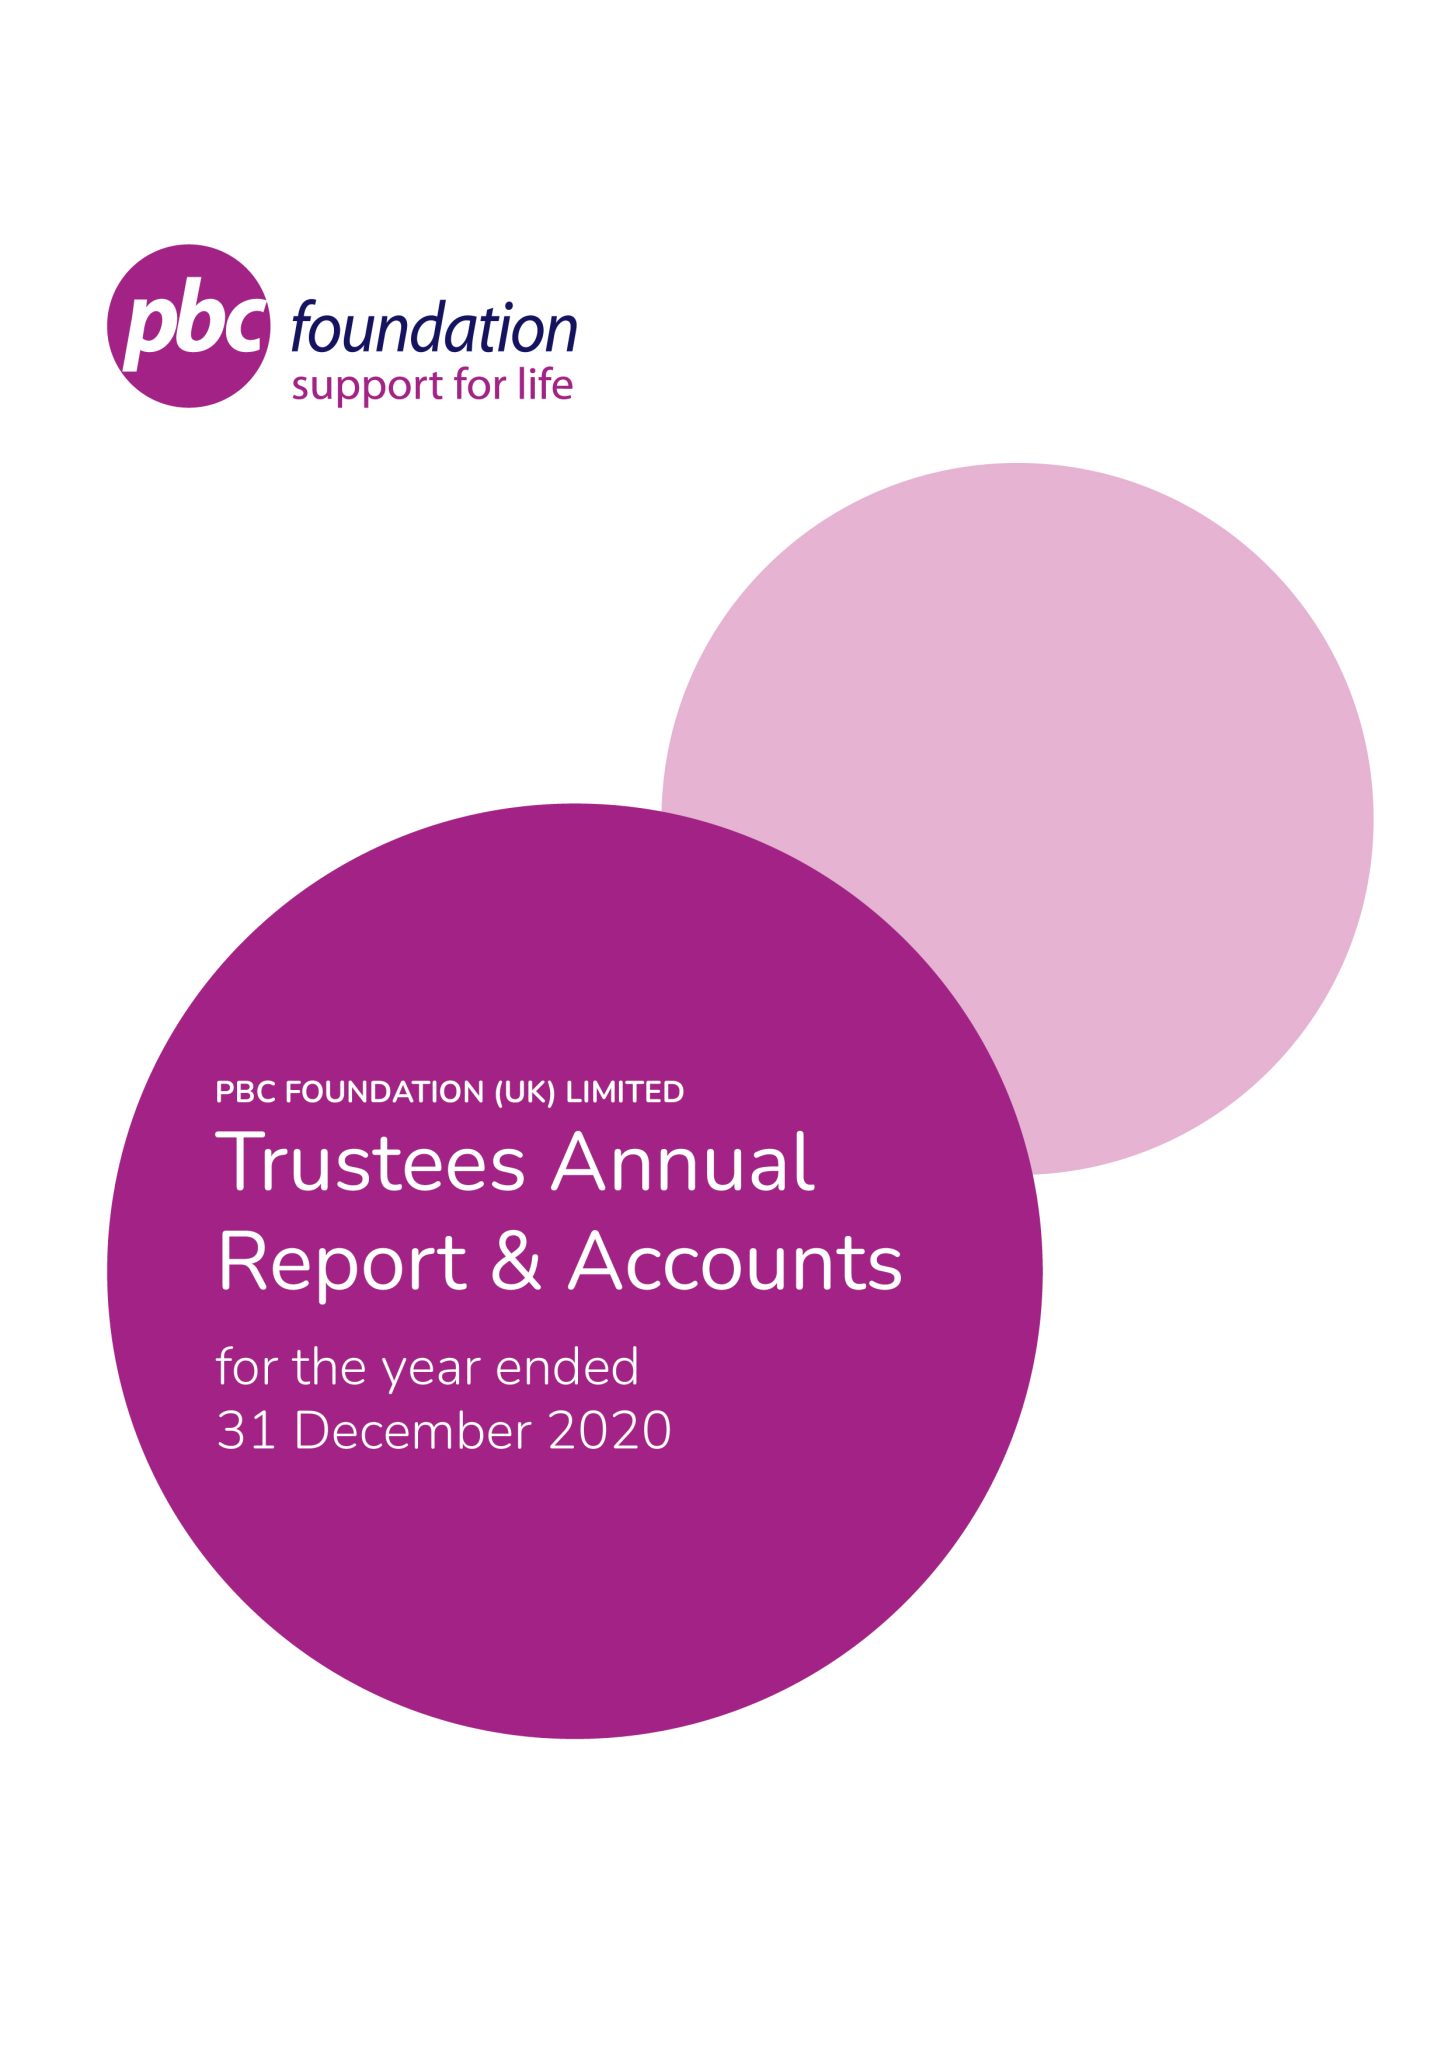 The cover of the PBC Foundation annual report and accounts for year ending 2020